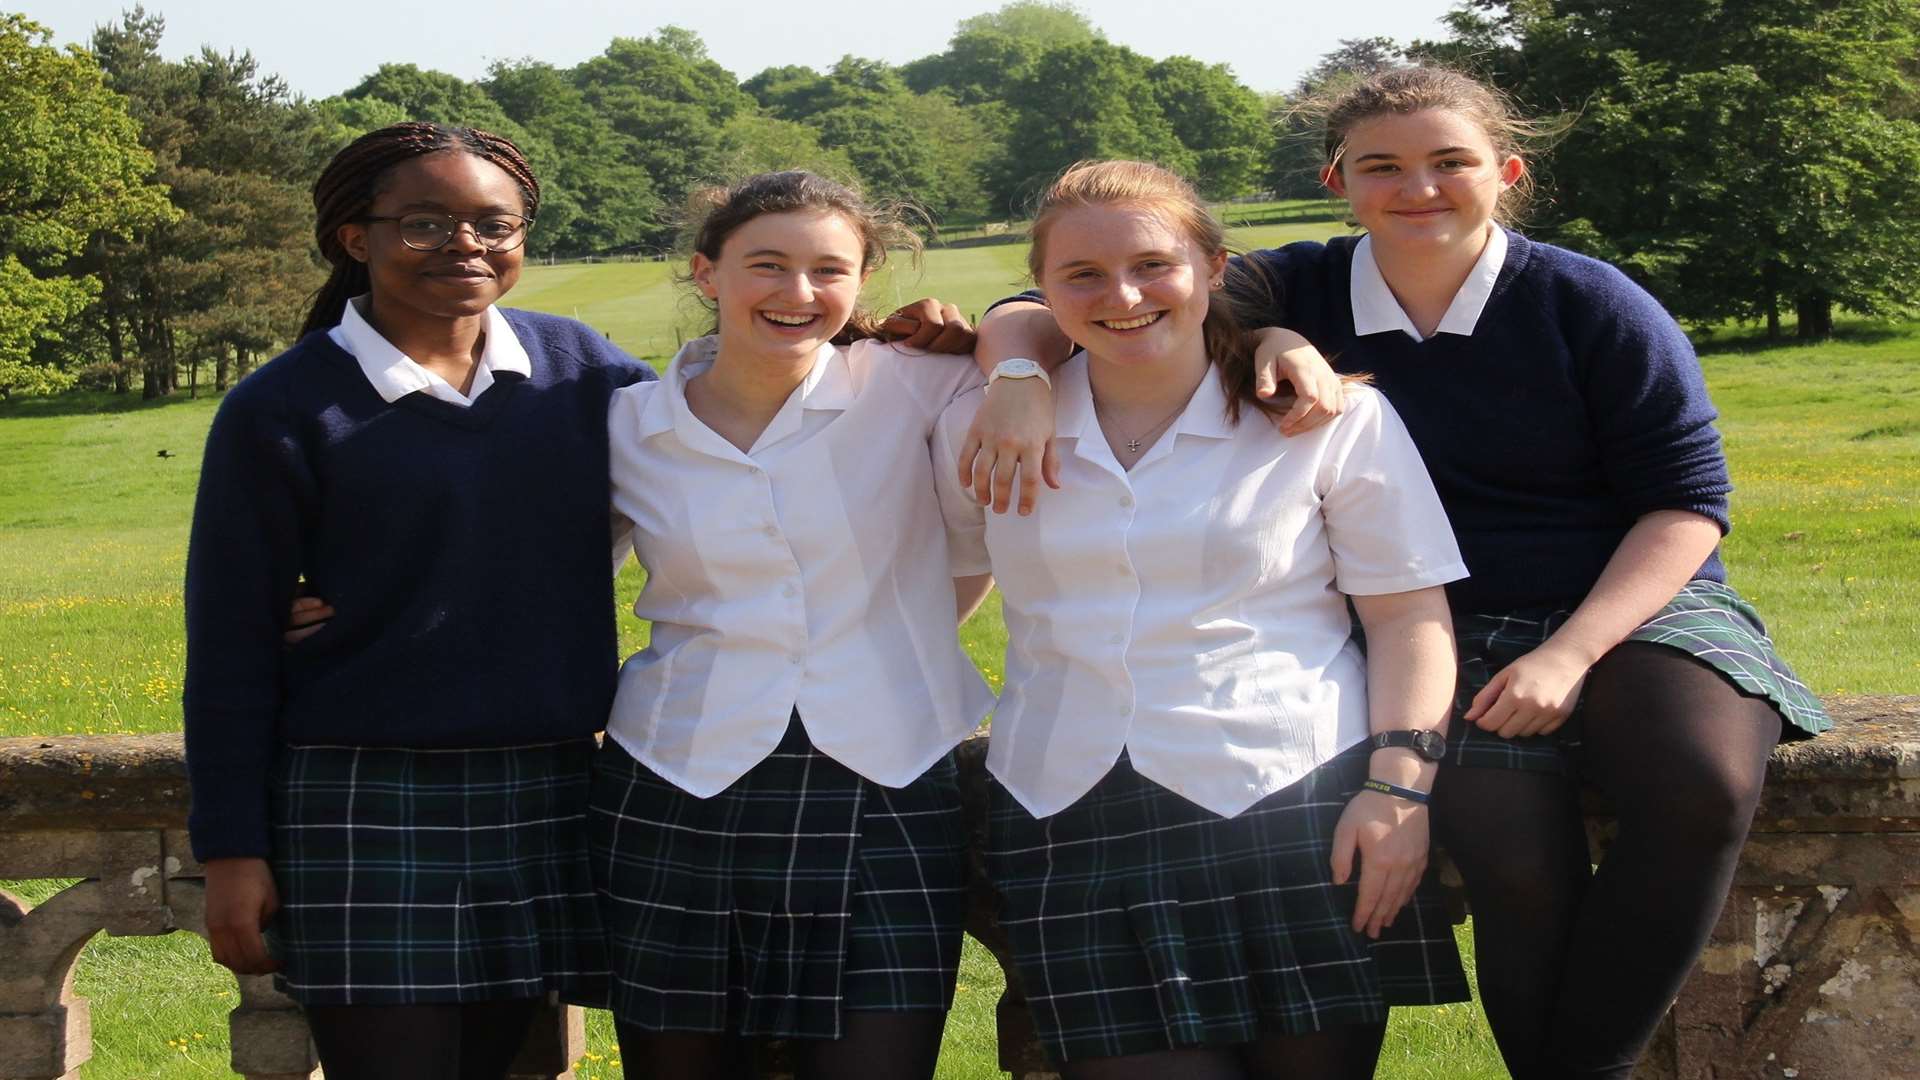 GCSE results day at Benenden School, Benenden. Pictured are Ifeoluwa Adeogun, Caitlin Gluckstein, Flo Plant and Lexi Hardee, all of whom achieved at least 11 A* or A grades this morning